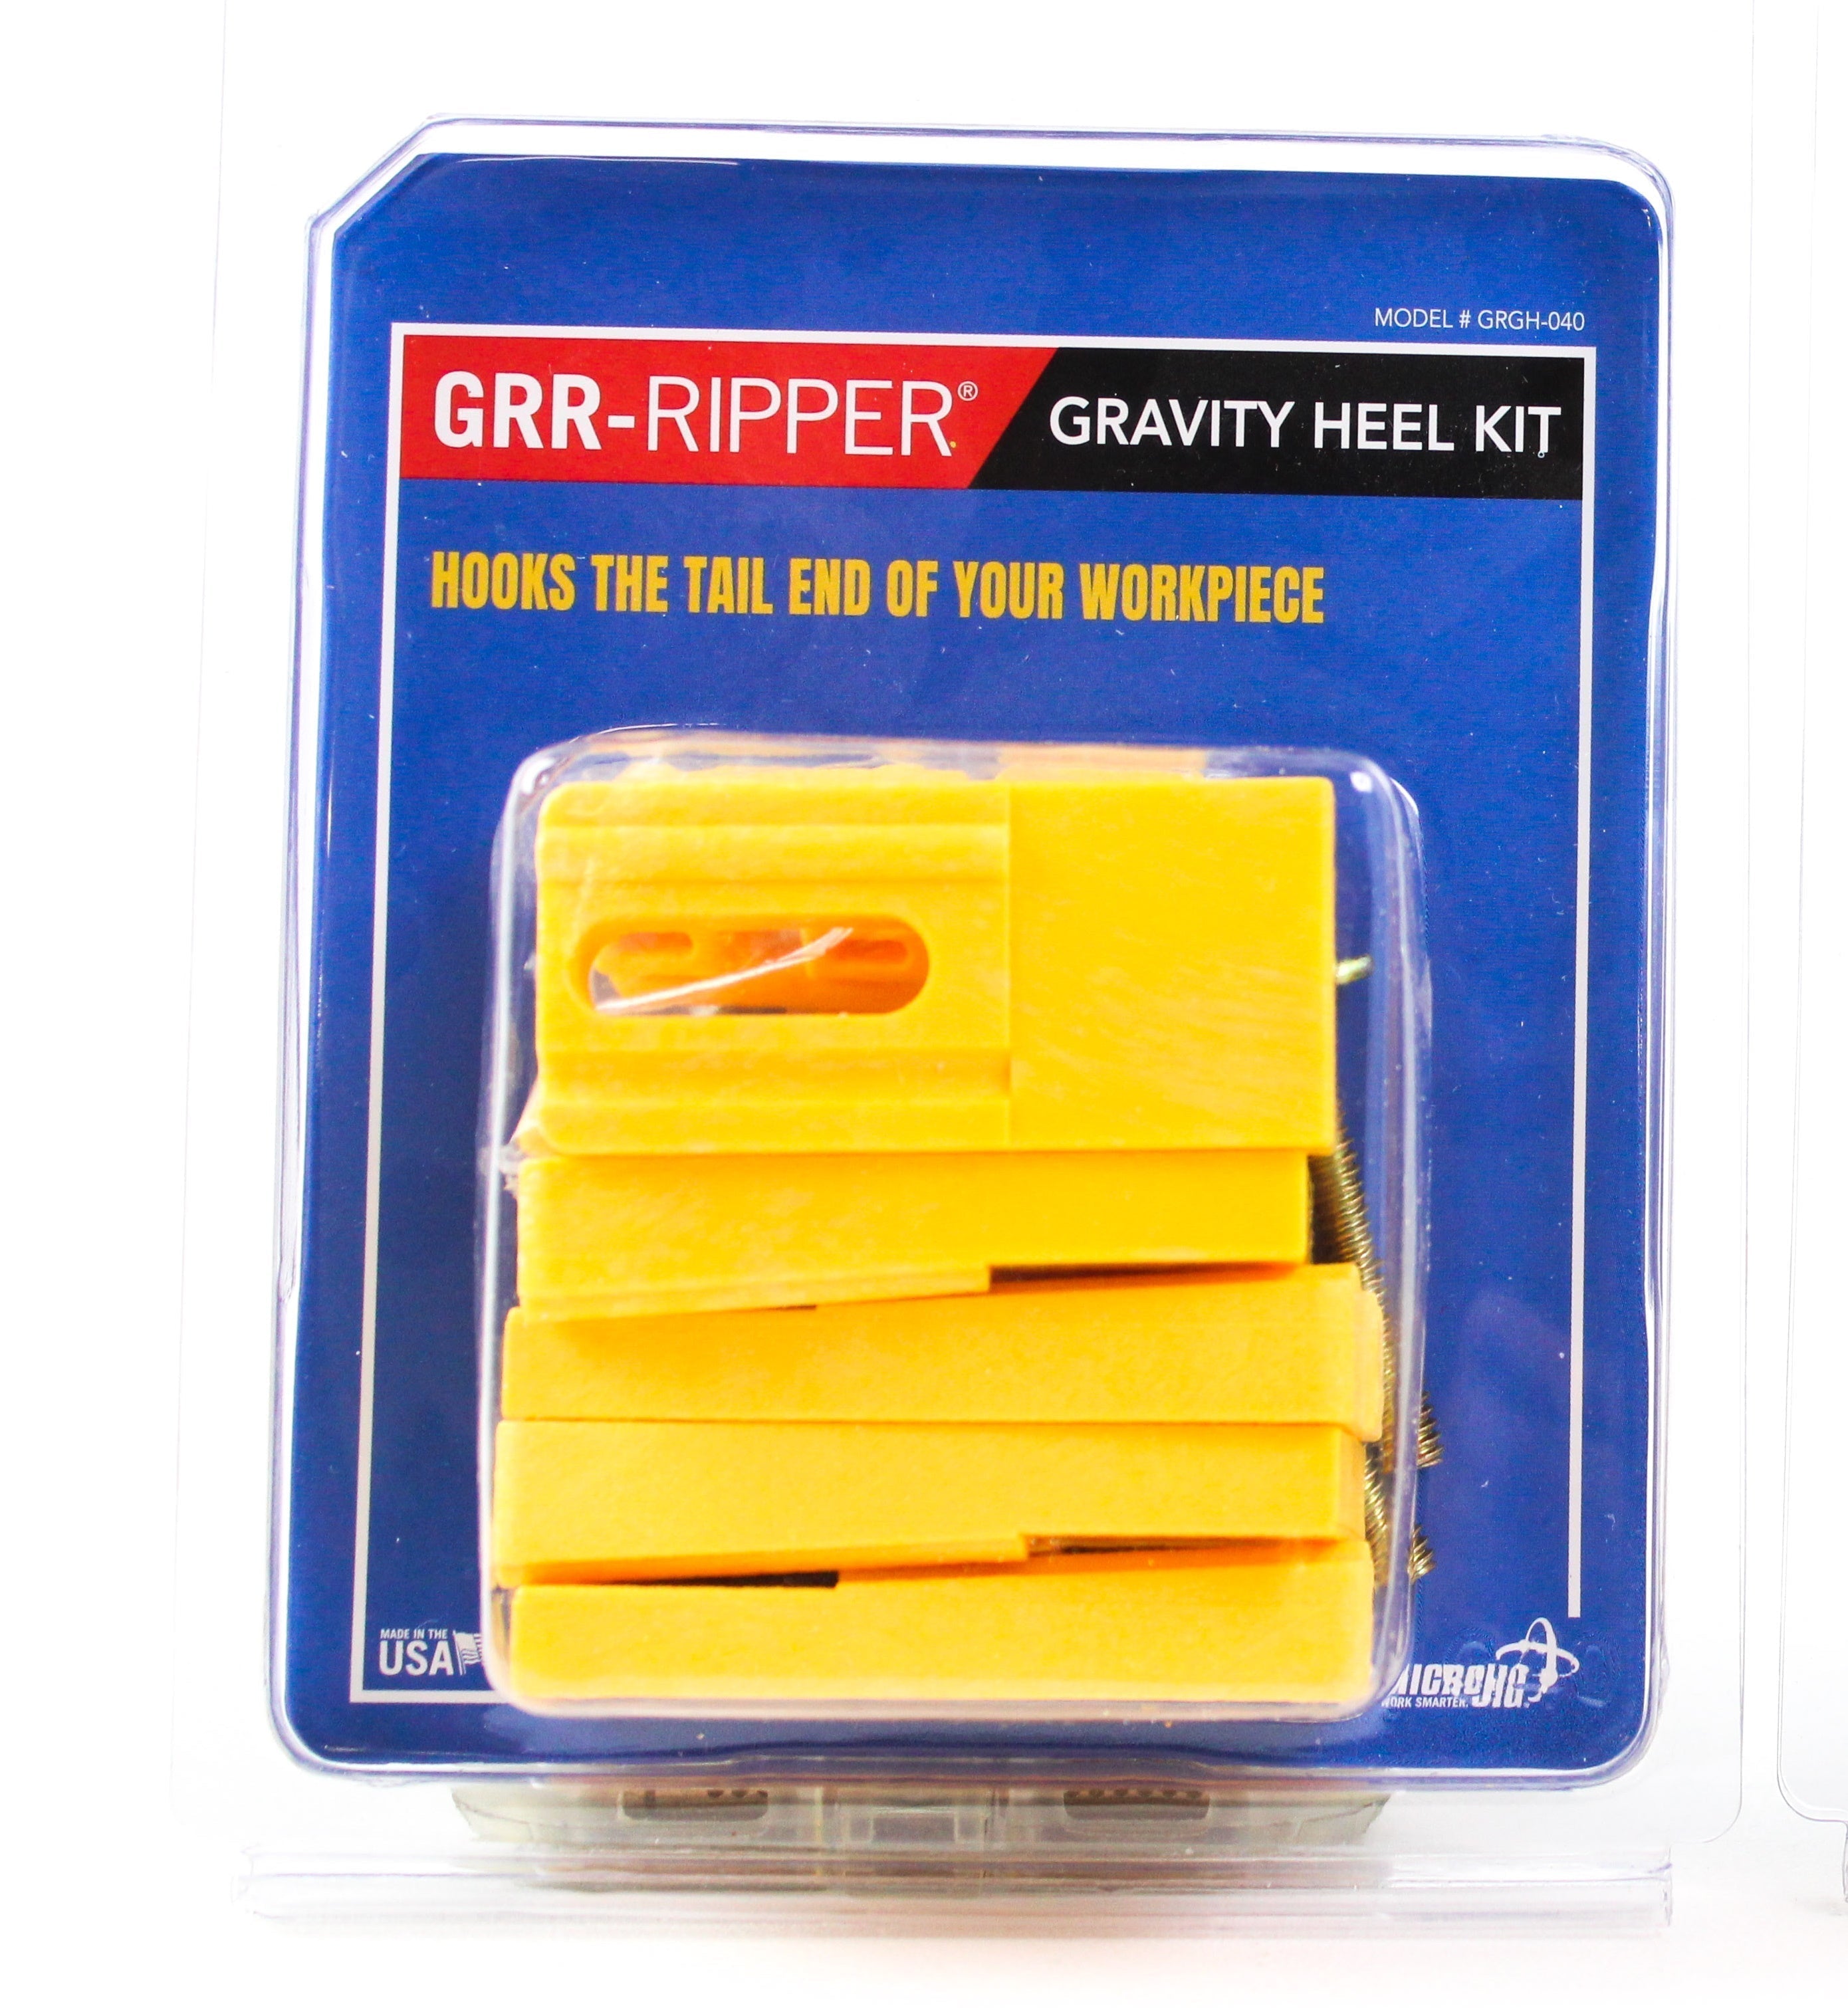 Microjig Ripper Accessory Gravity Heel Kit GRGH-040 Power Tool Services